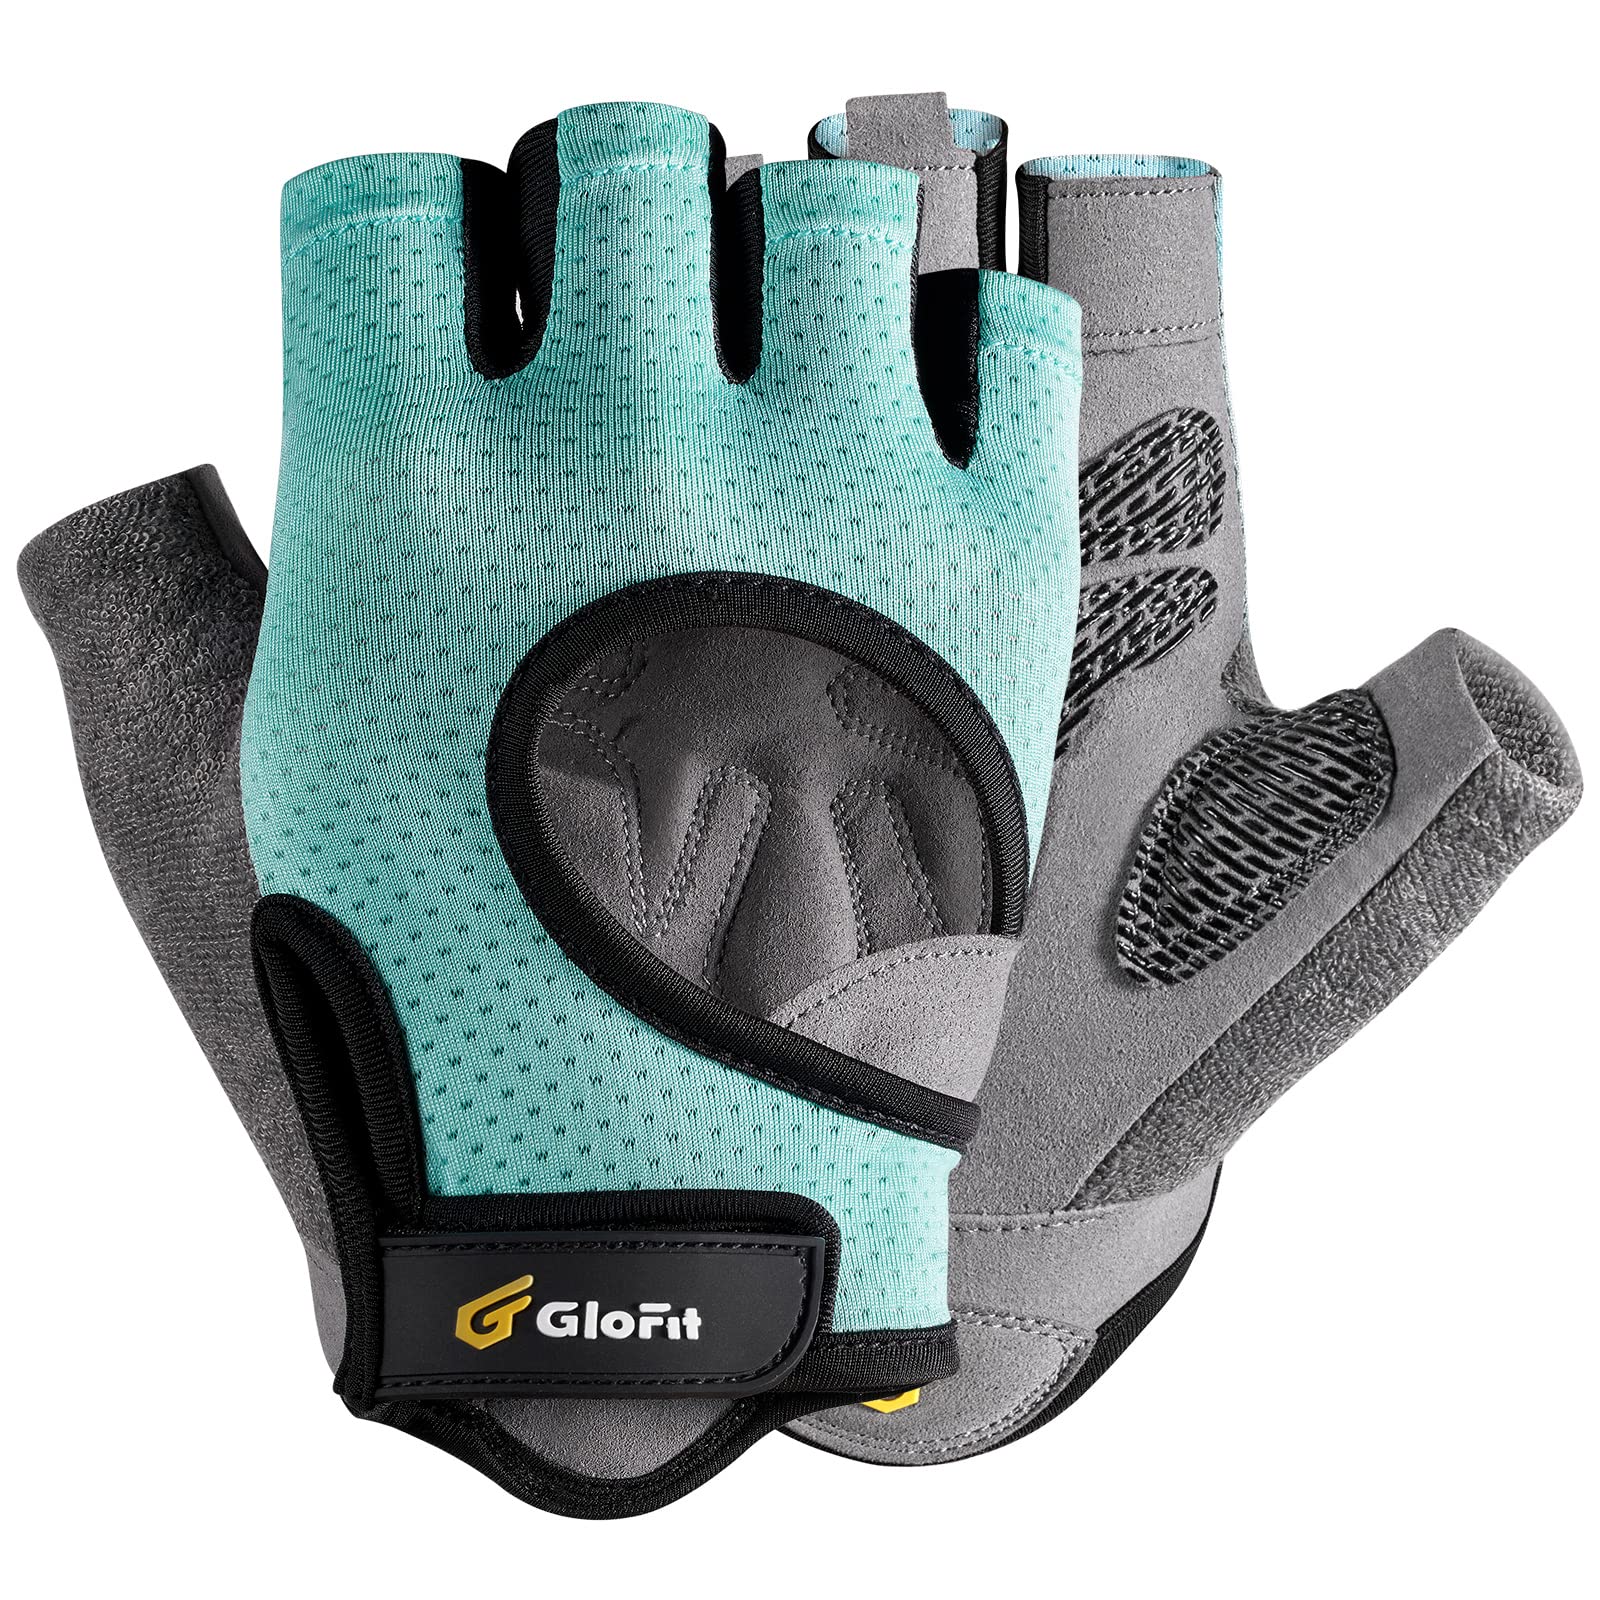 Glofit Workout Gloves for Women and Men, Weight Lifting Gloves Anti-Slip  Padded Palm, Light Weight Fingerless Powerlifting Fingerless Gym Gloves for  Exercise, Fitness, Training, Cycling Blue Medium